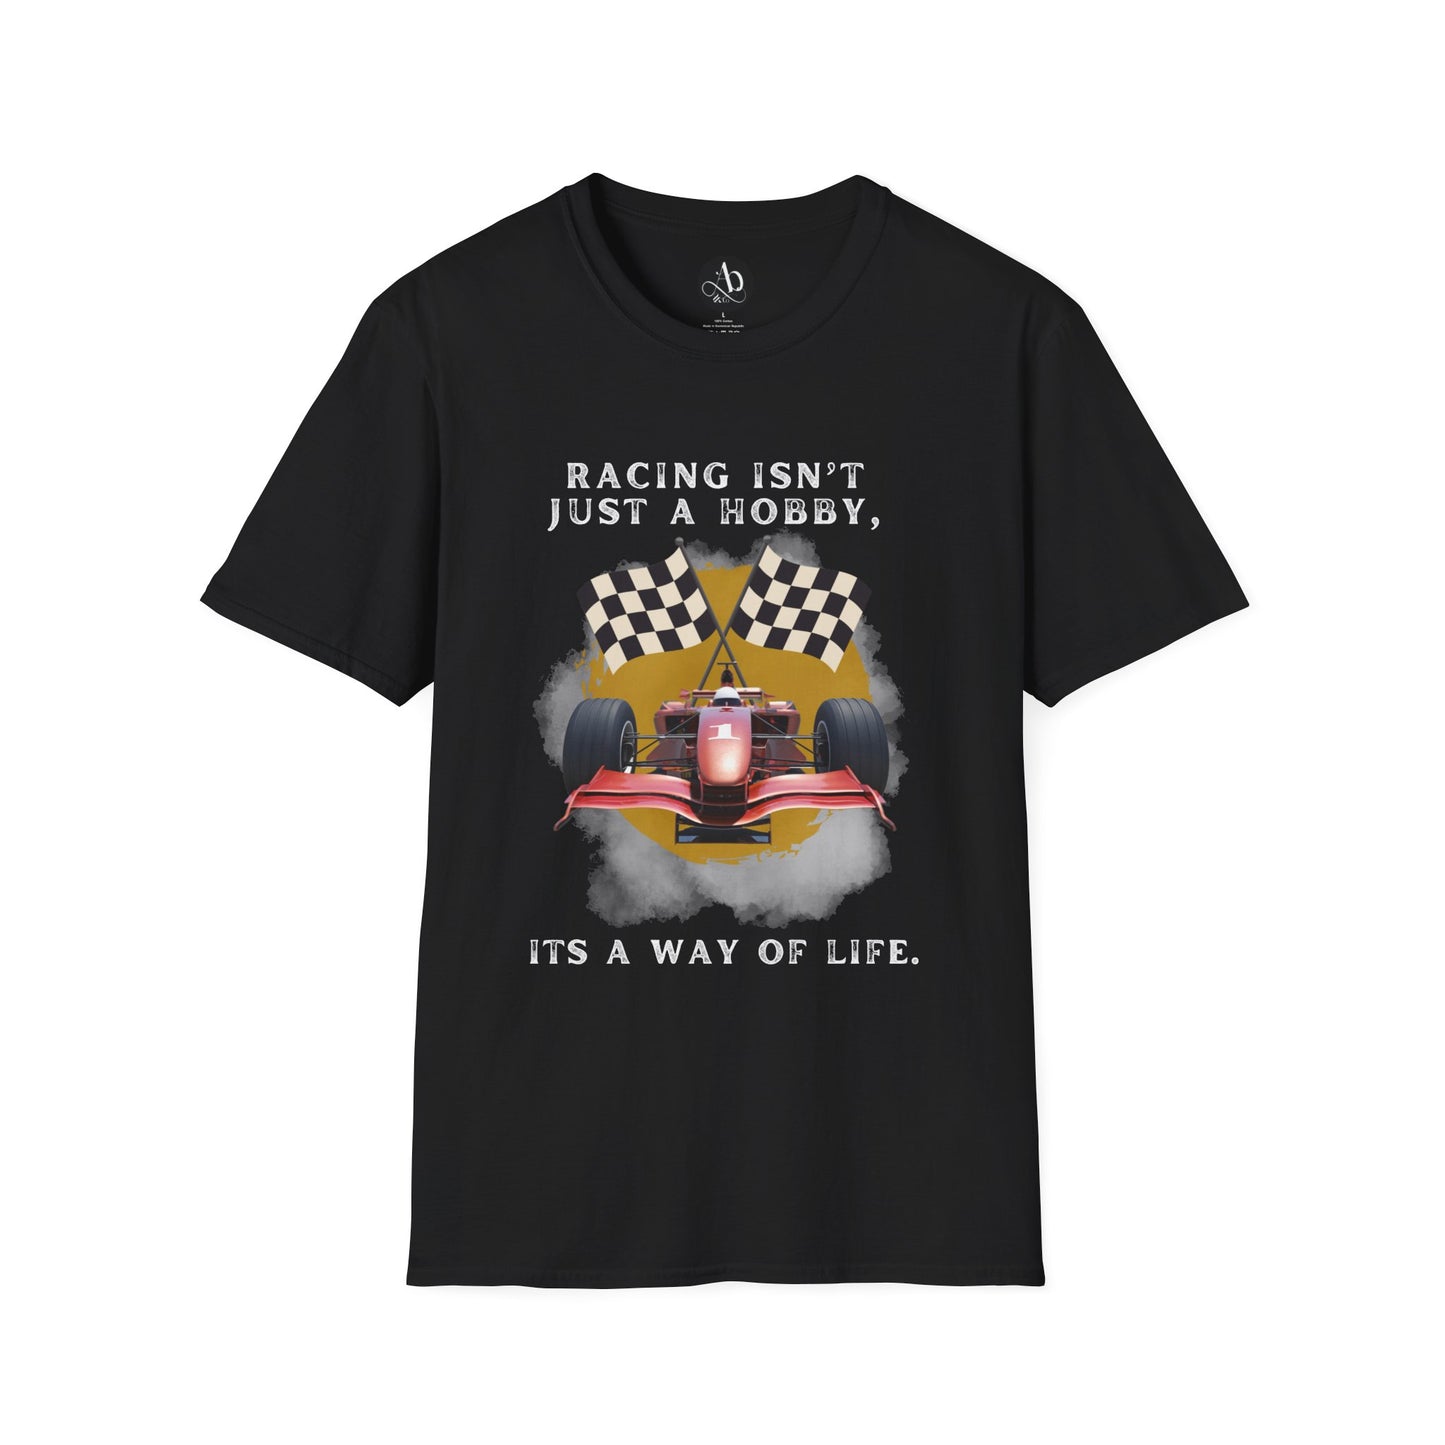 Unisex Softstyle T-Shirt - Racing isn't just a hobby, it's a way of life